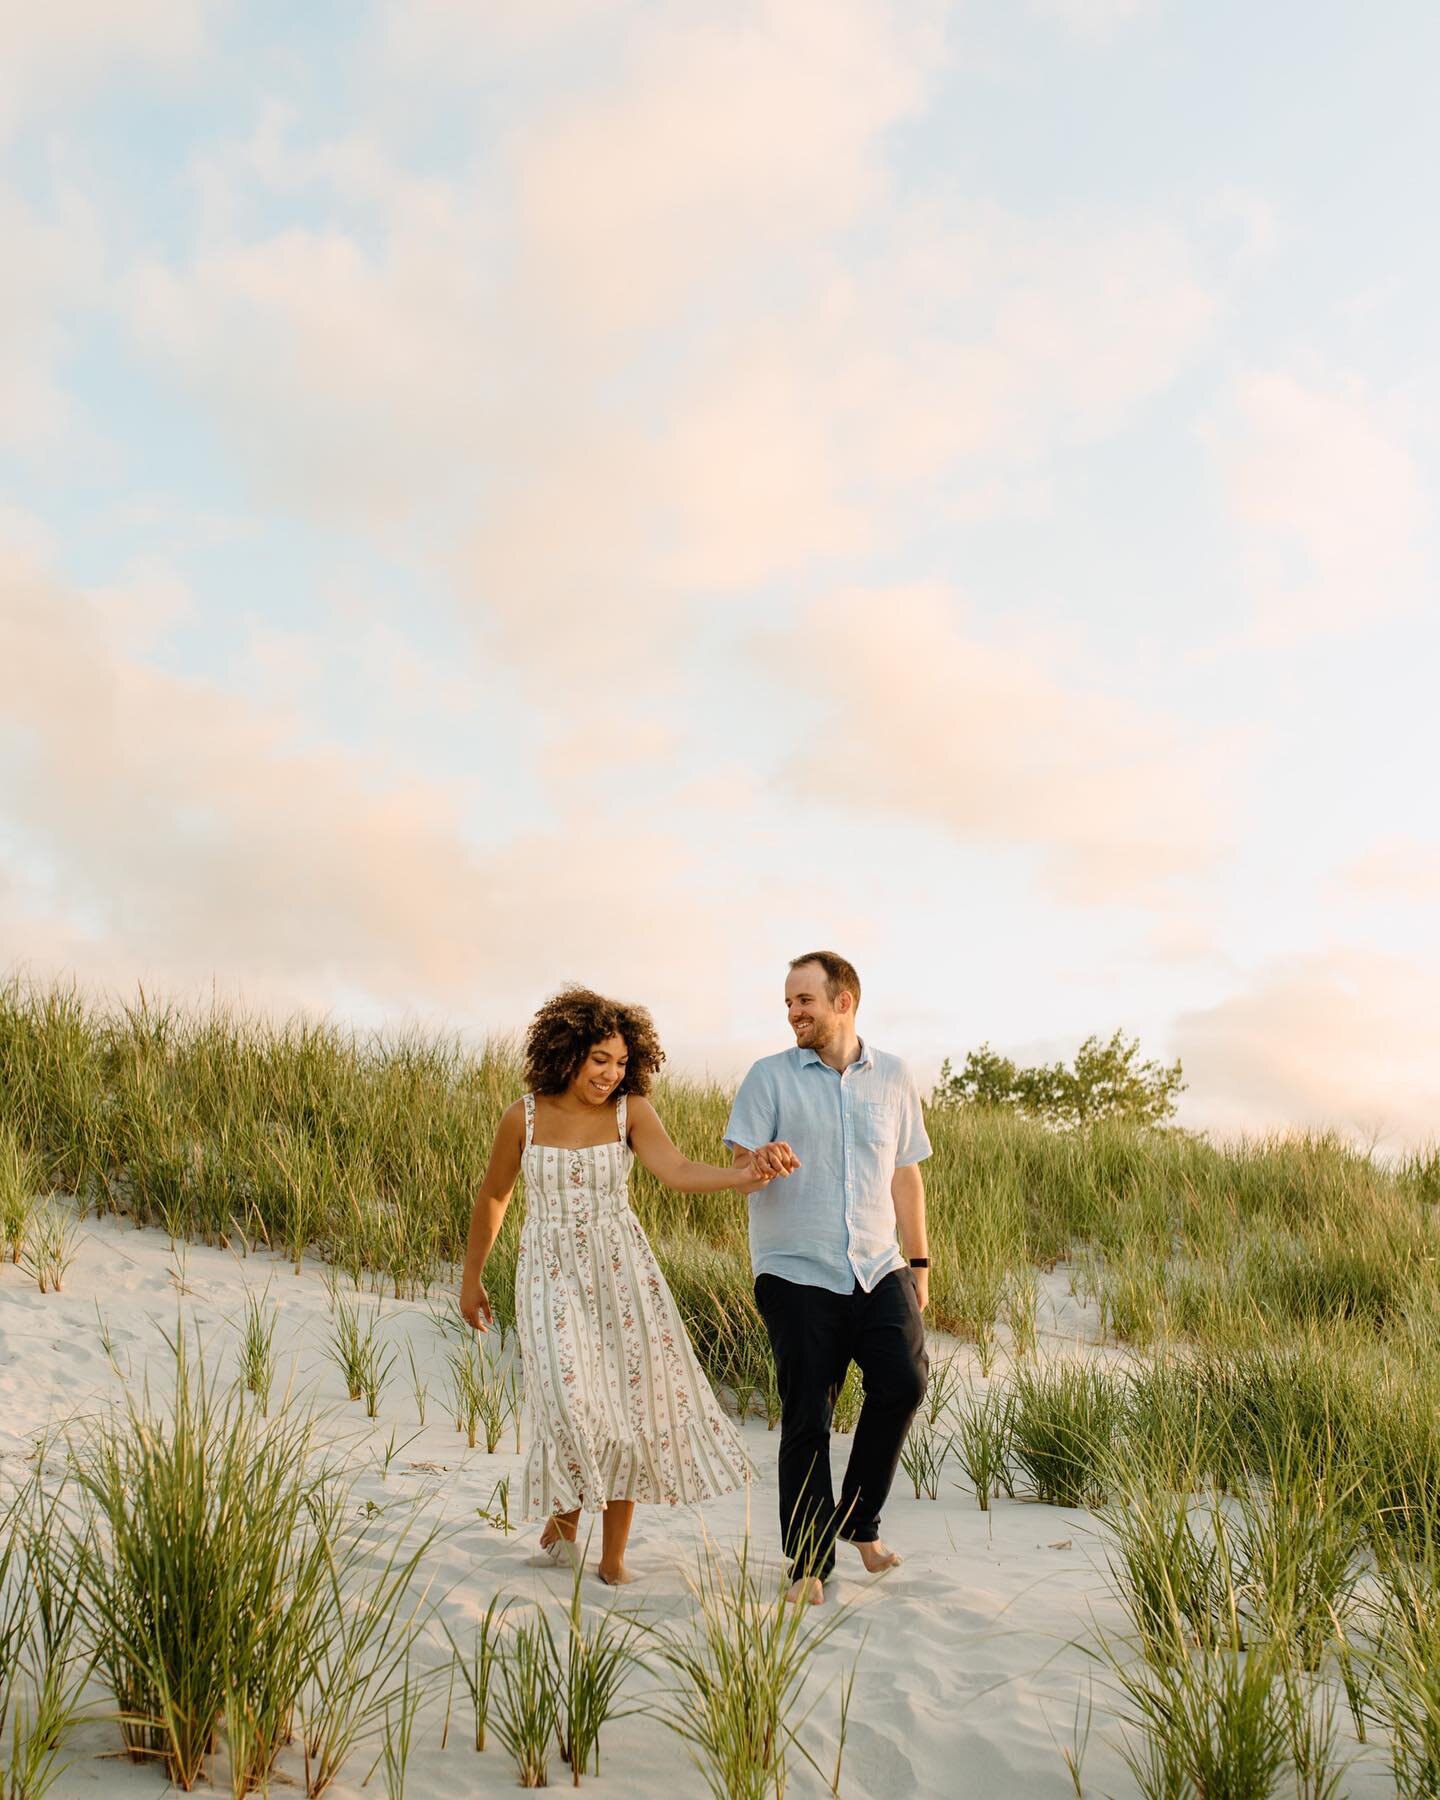 sandy toes, cotton candy skies and the cutest couple = the perfect Monday evening 💛
⠀⠀⠀⠀⠀⠀⠀⠀⠀
After a preeetty sweaty day in the city, it was a complete joy to drive out to Gloucester and frolic around the beach with C+B and mother nature was seriou